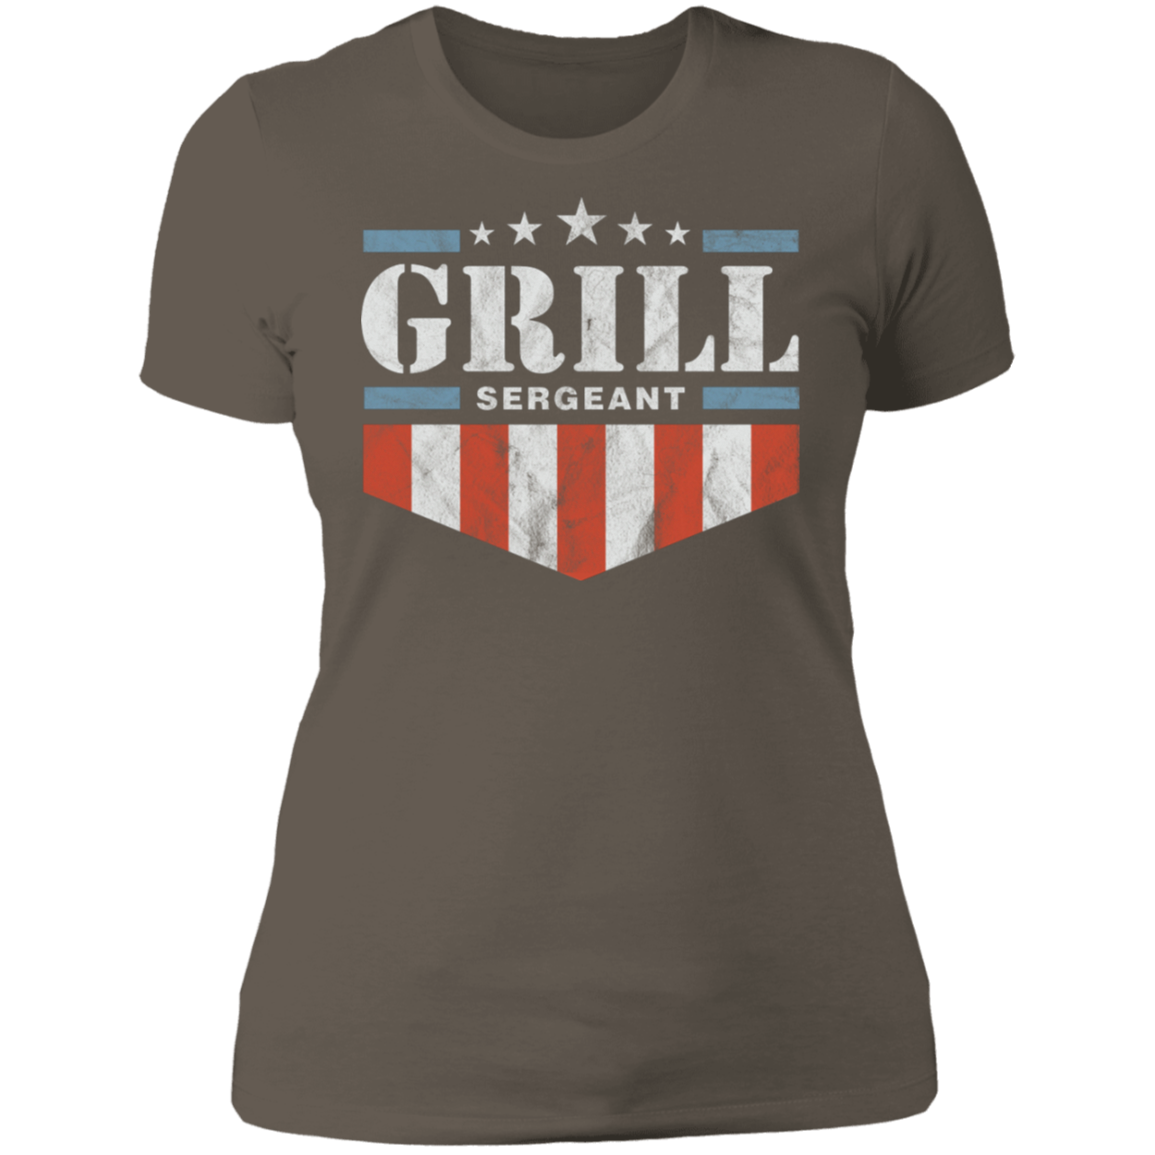 Grill Sergeant Red White and Blue Boyfriend T-Shirt